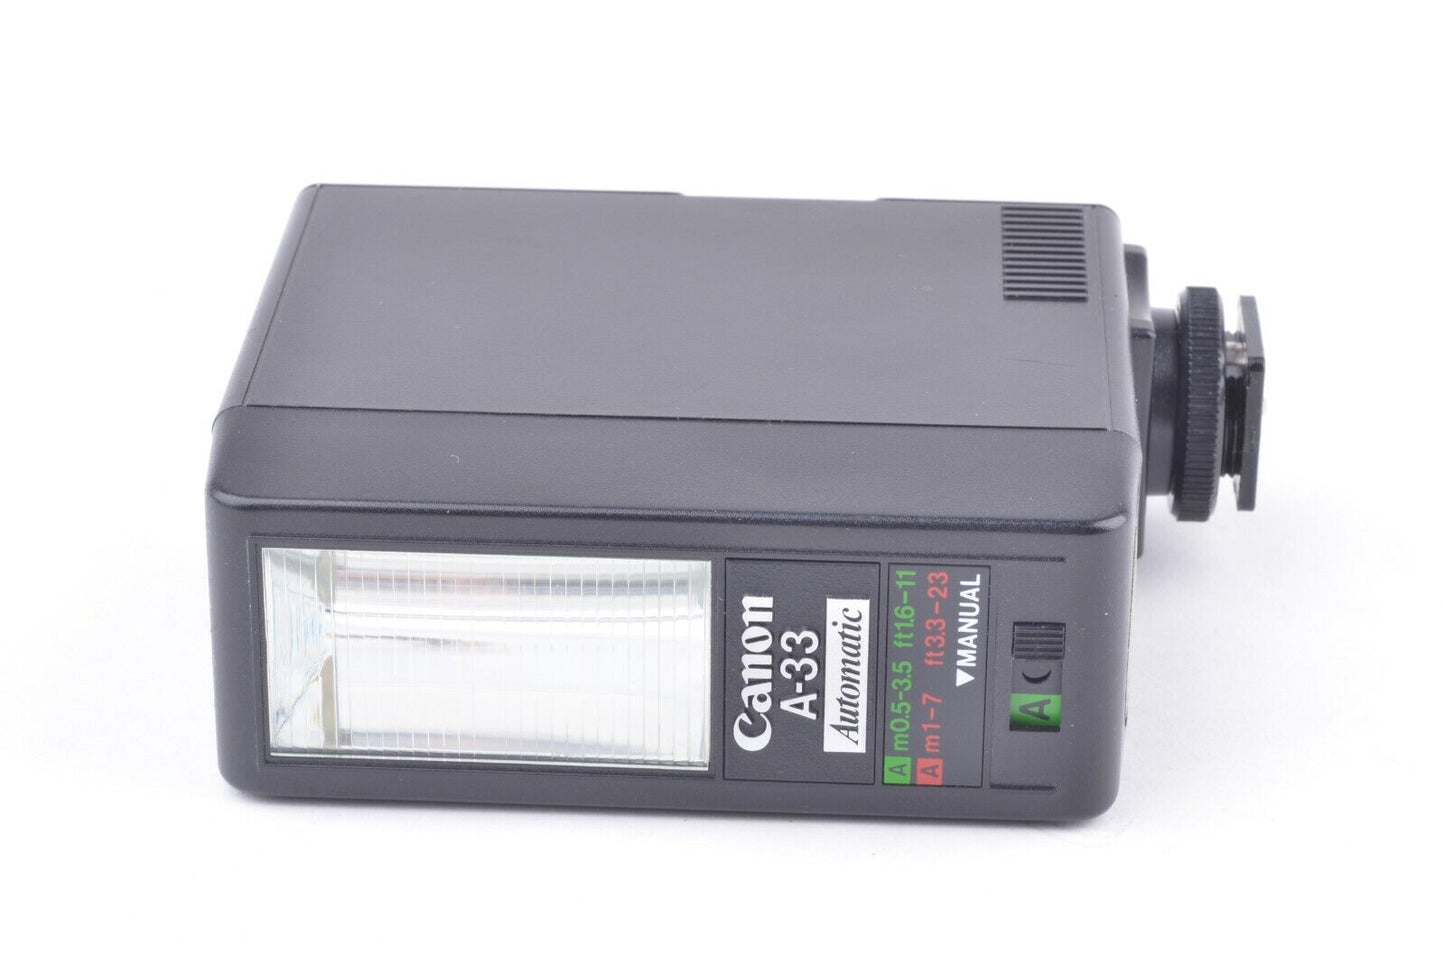 EXC++ CANON SPEEDLITE A-33 ELECTRONIC FLASH, CASE, TESTED, NICE